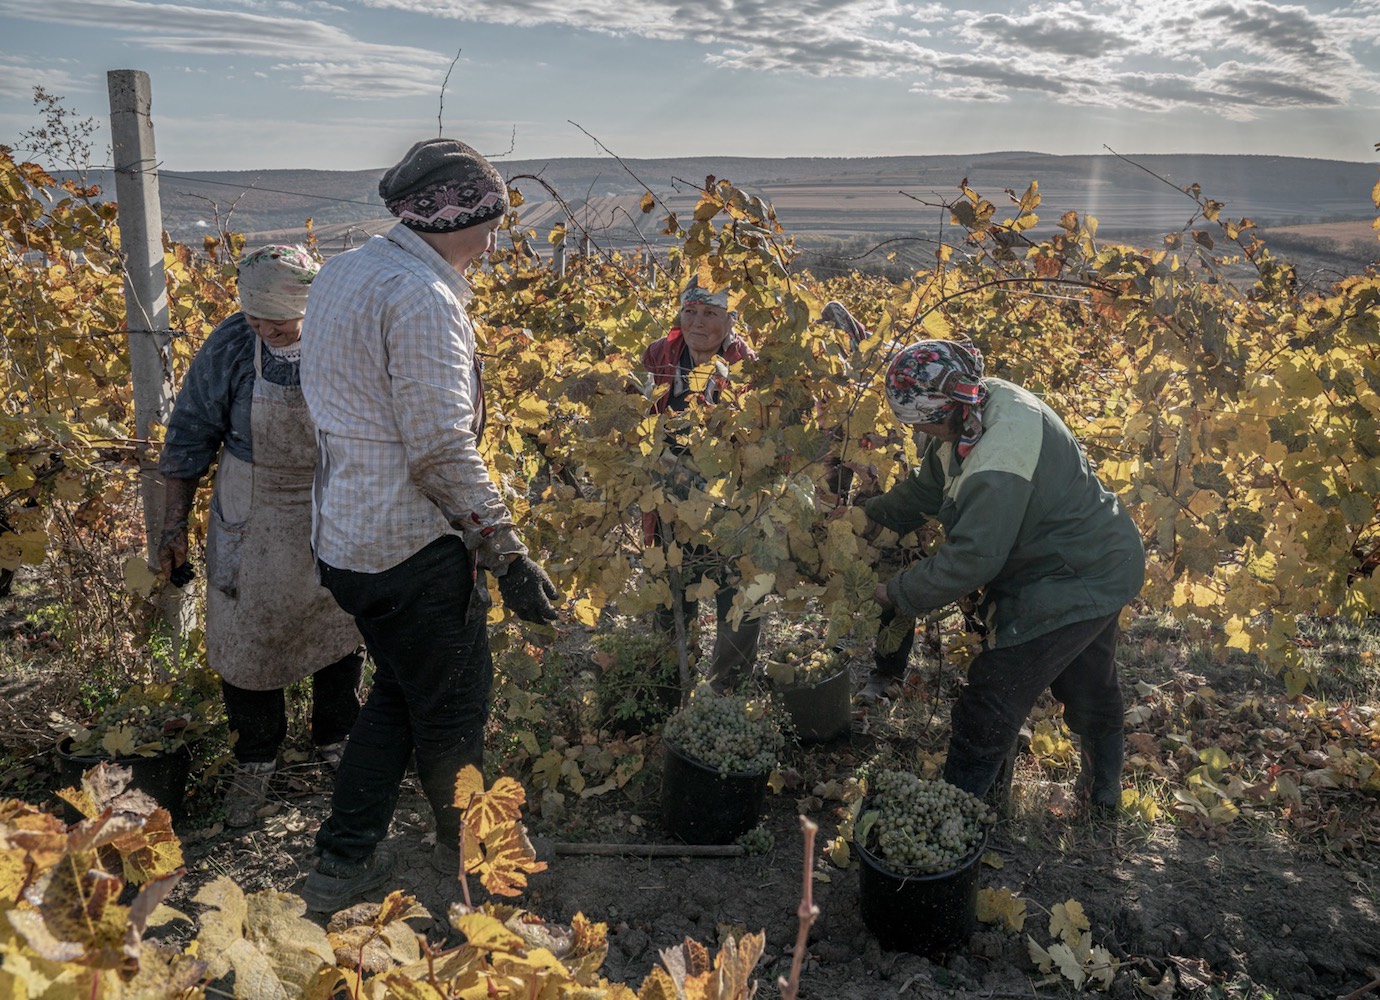 ‘Everyone has a connection to winemaking:’ the family traditions forging Moldova’s boutique wine industry